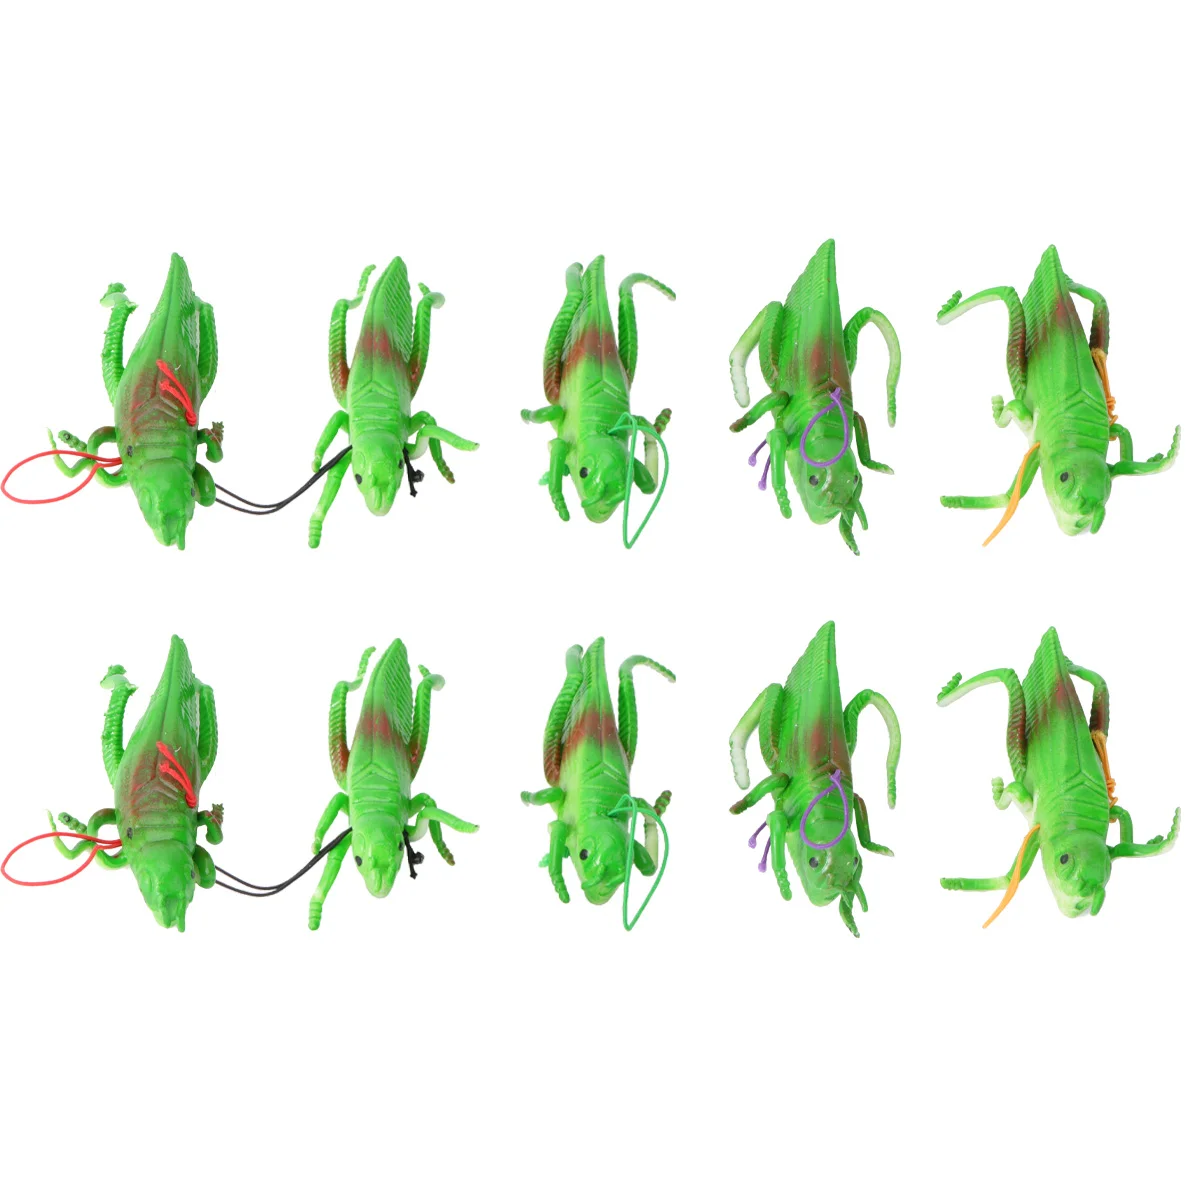 

10pcs simulated insect Insect Trick Toys Realistic Insect Grasshopper for April Fools Day grasshoppers Party grasshoppers